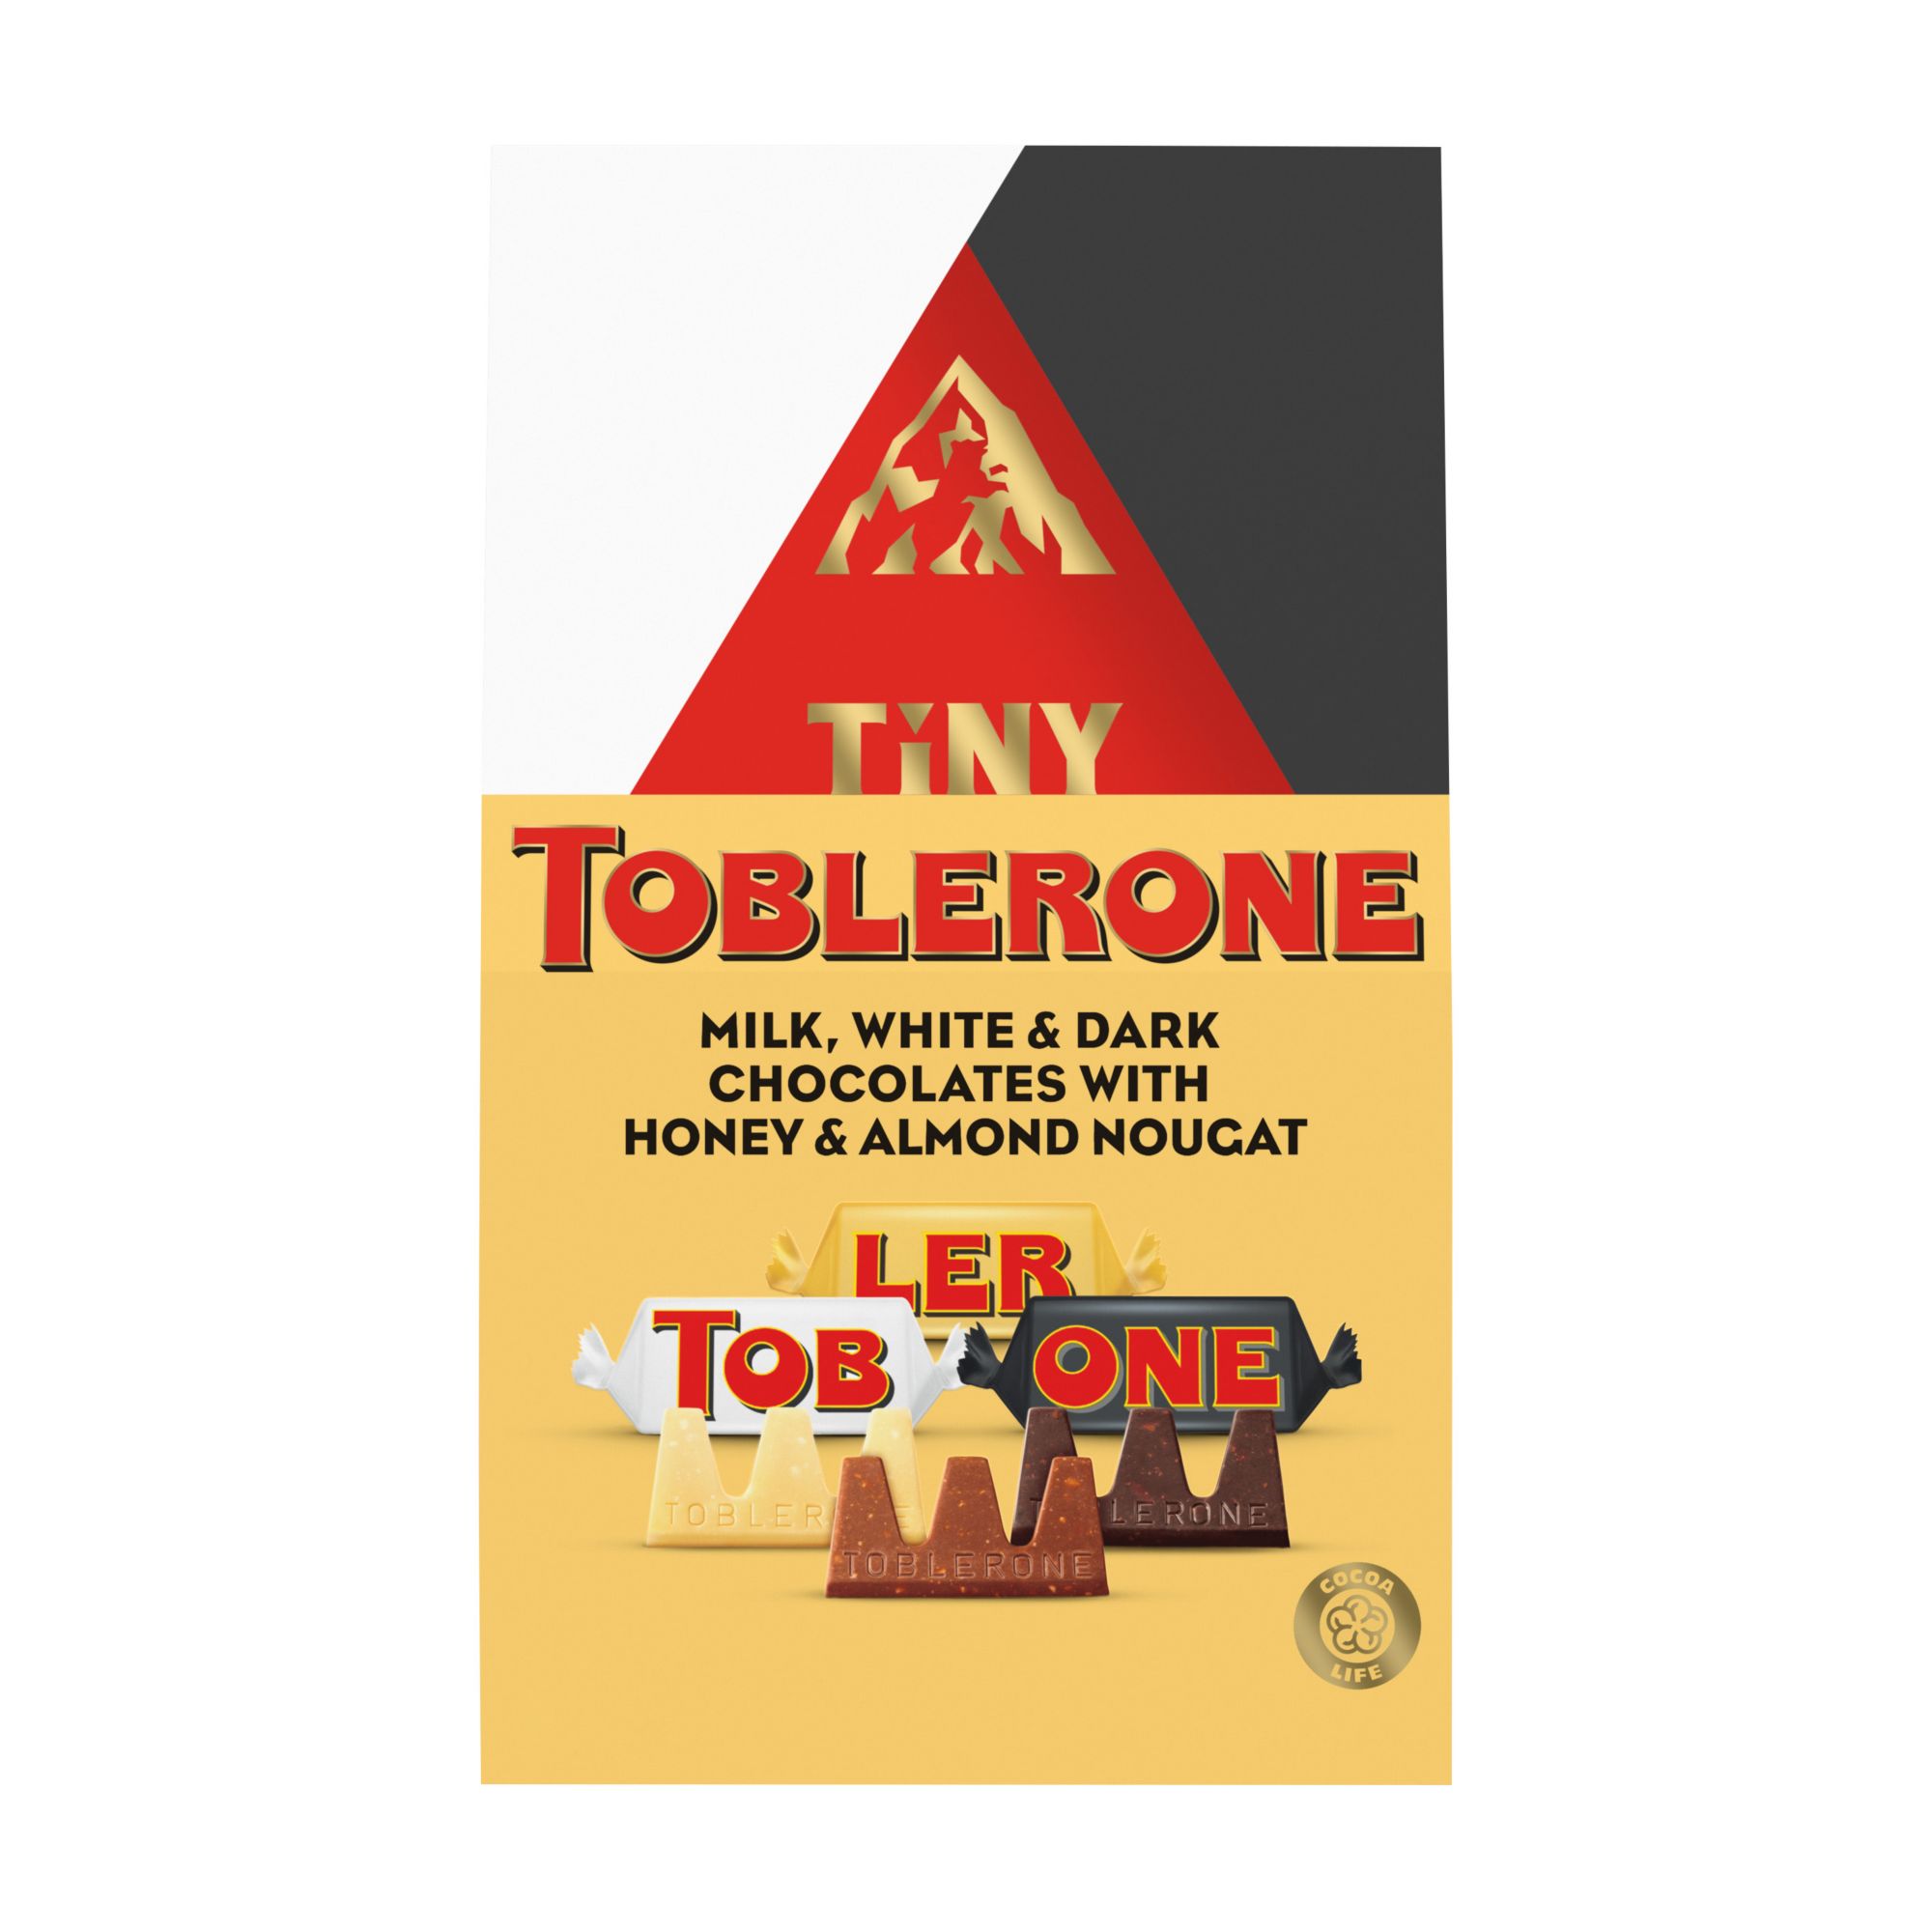 Toblerone - Looking for a present for the Toblerone lover